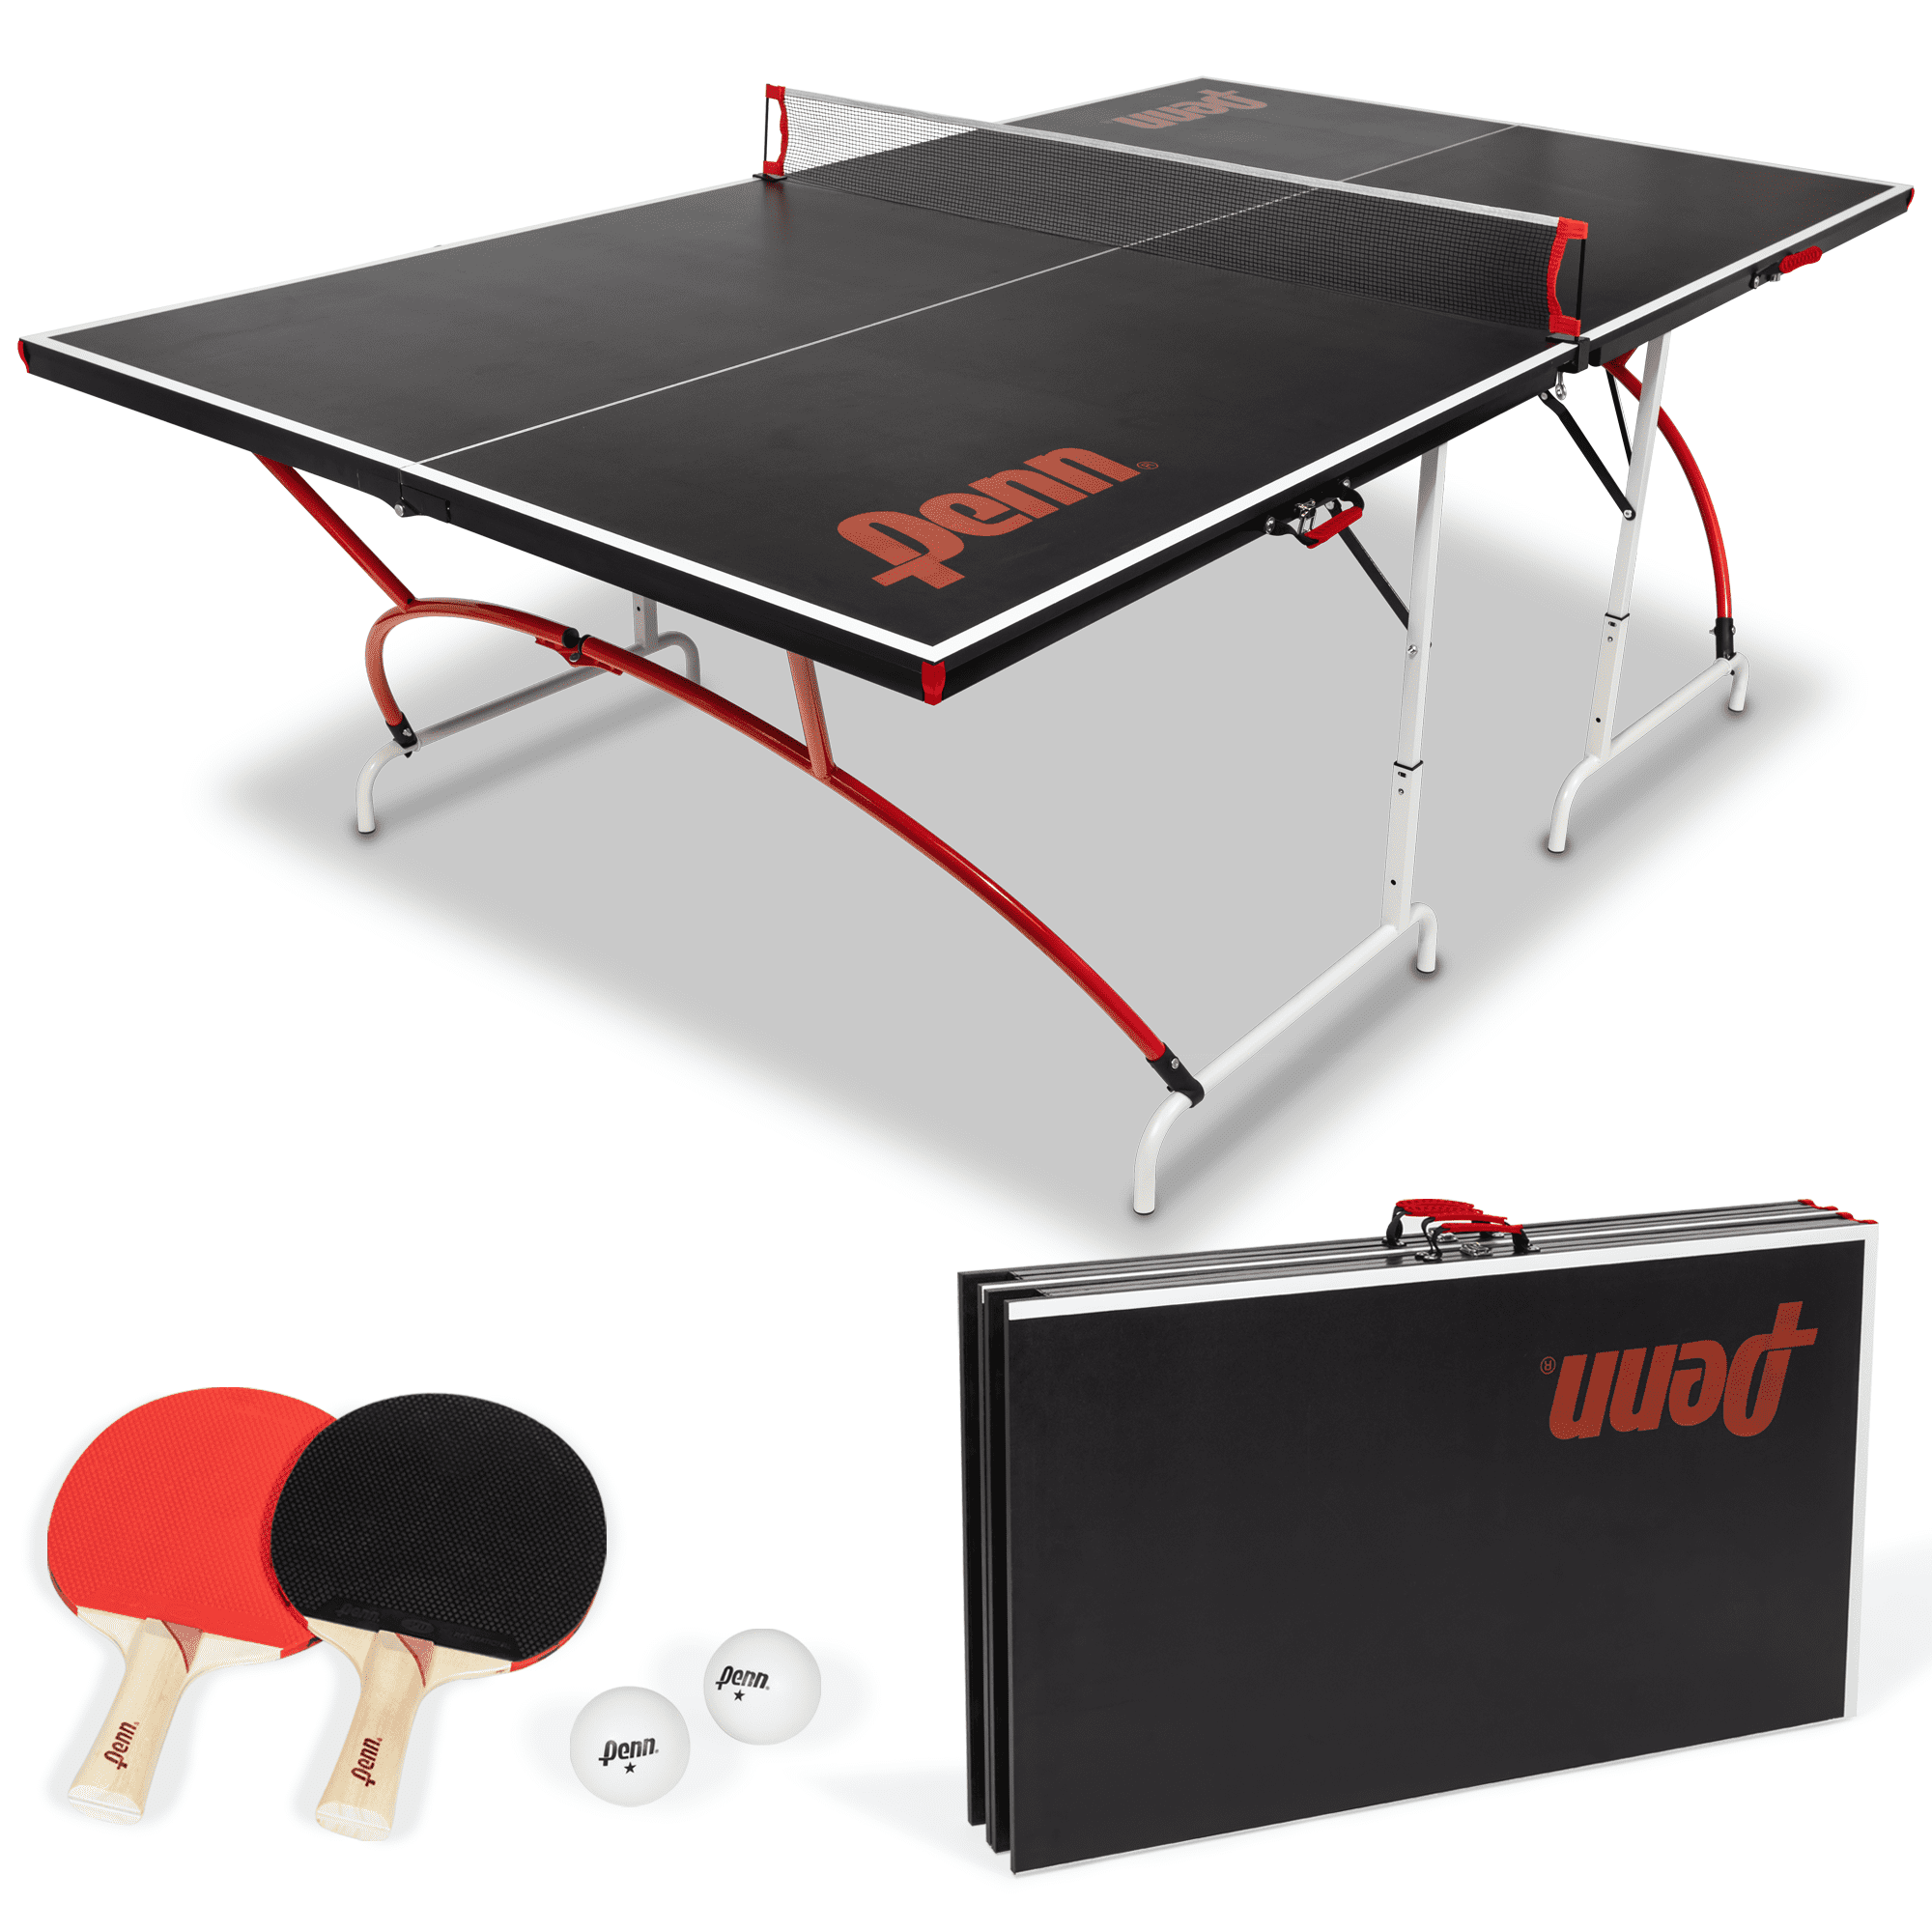 Penn Easy Setup Mid Size 15mm Table Tennis Table, Sets up in Minutes - Perfect for Game Room, Playroom, Basement, Garage Man Cave - Walmart.com